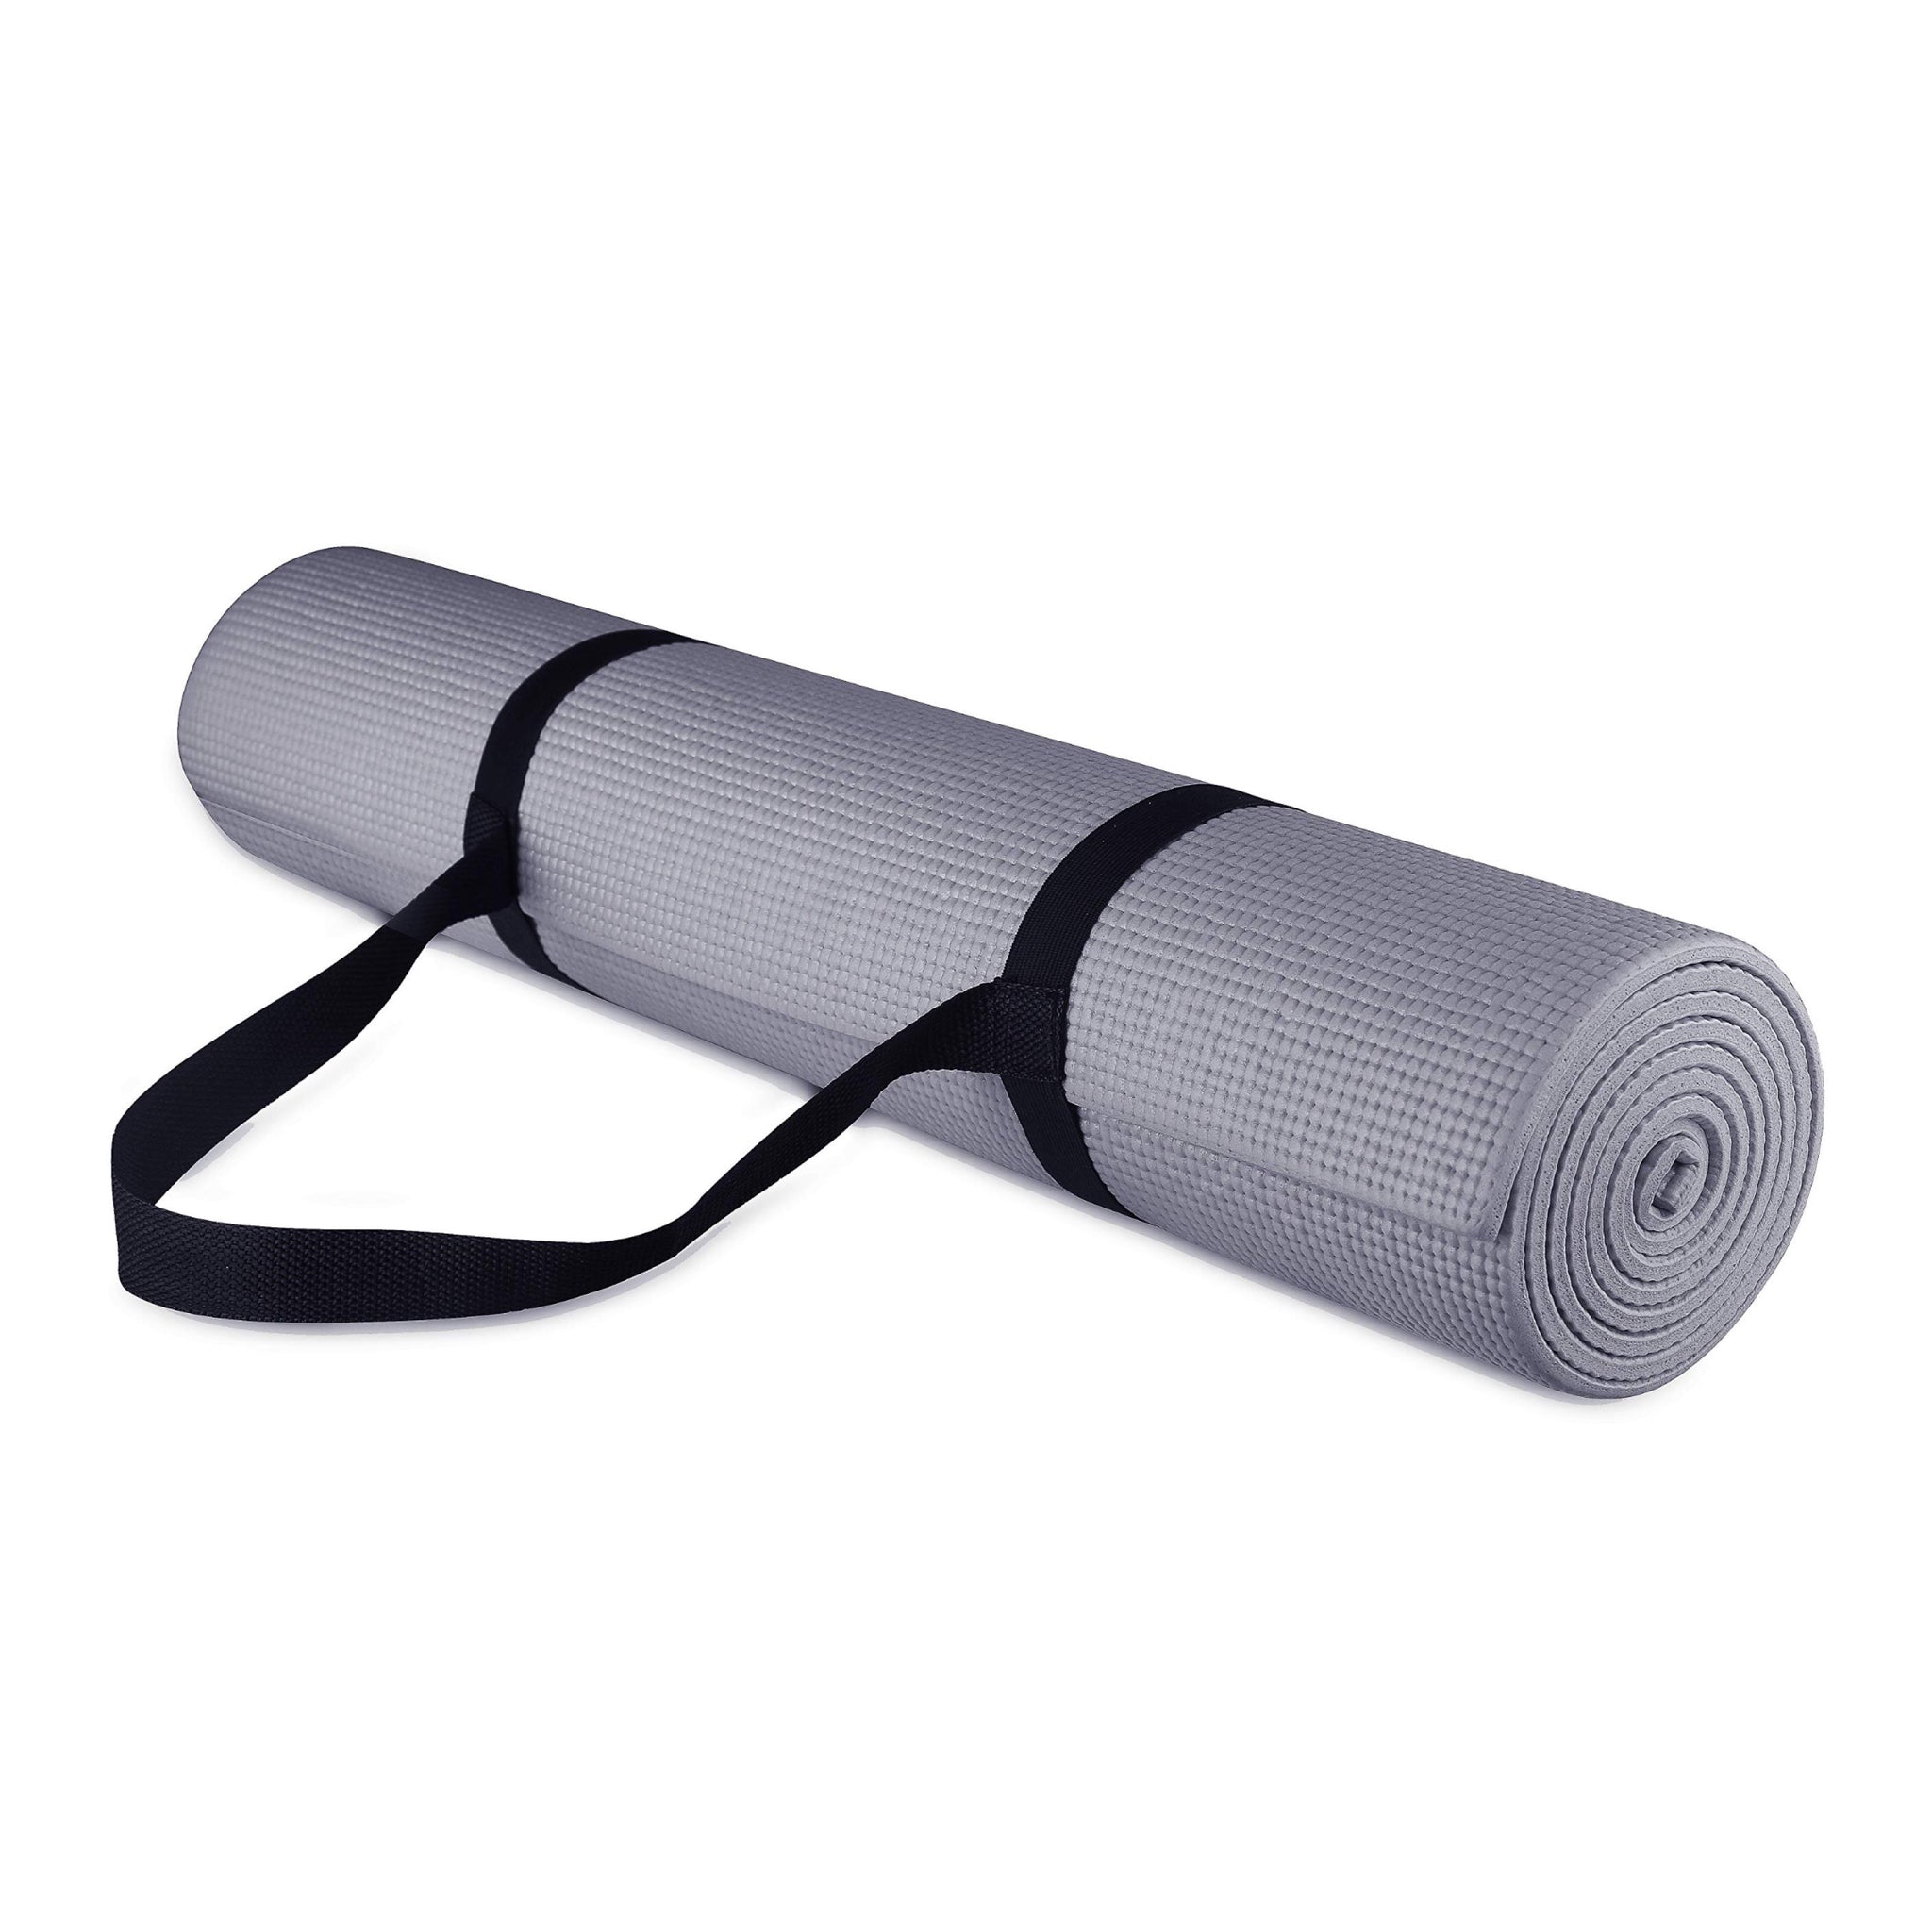 Wholesale balancefrom goyoga For Precise Weight Measurement